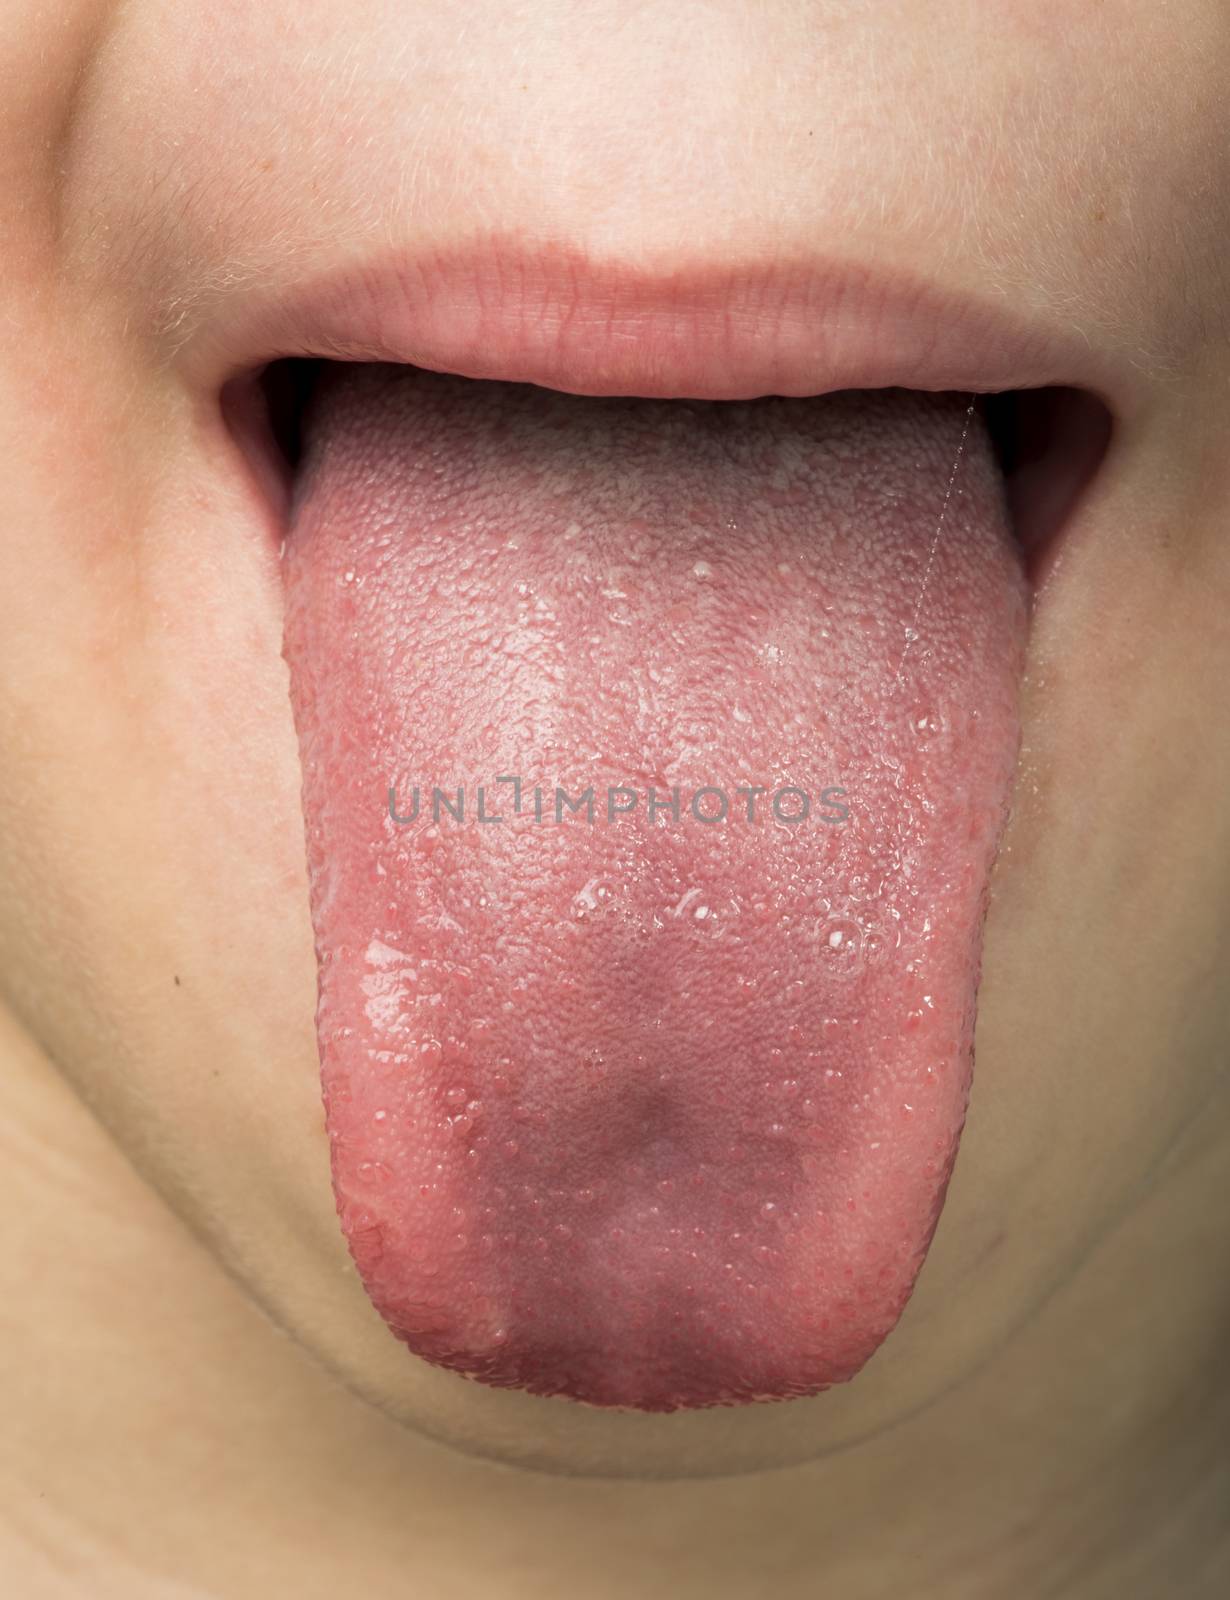 Human tongue protruding out. Child tongue.